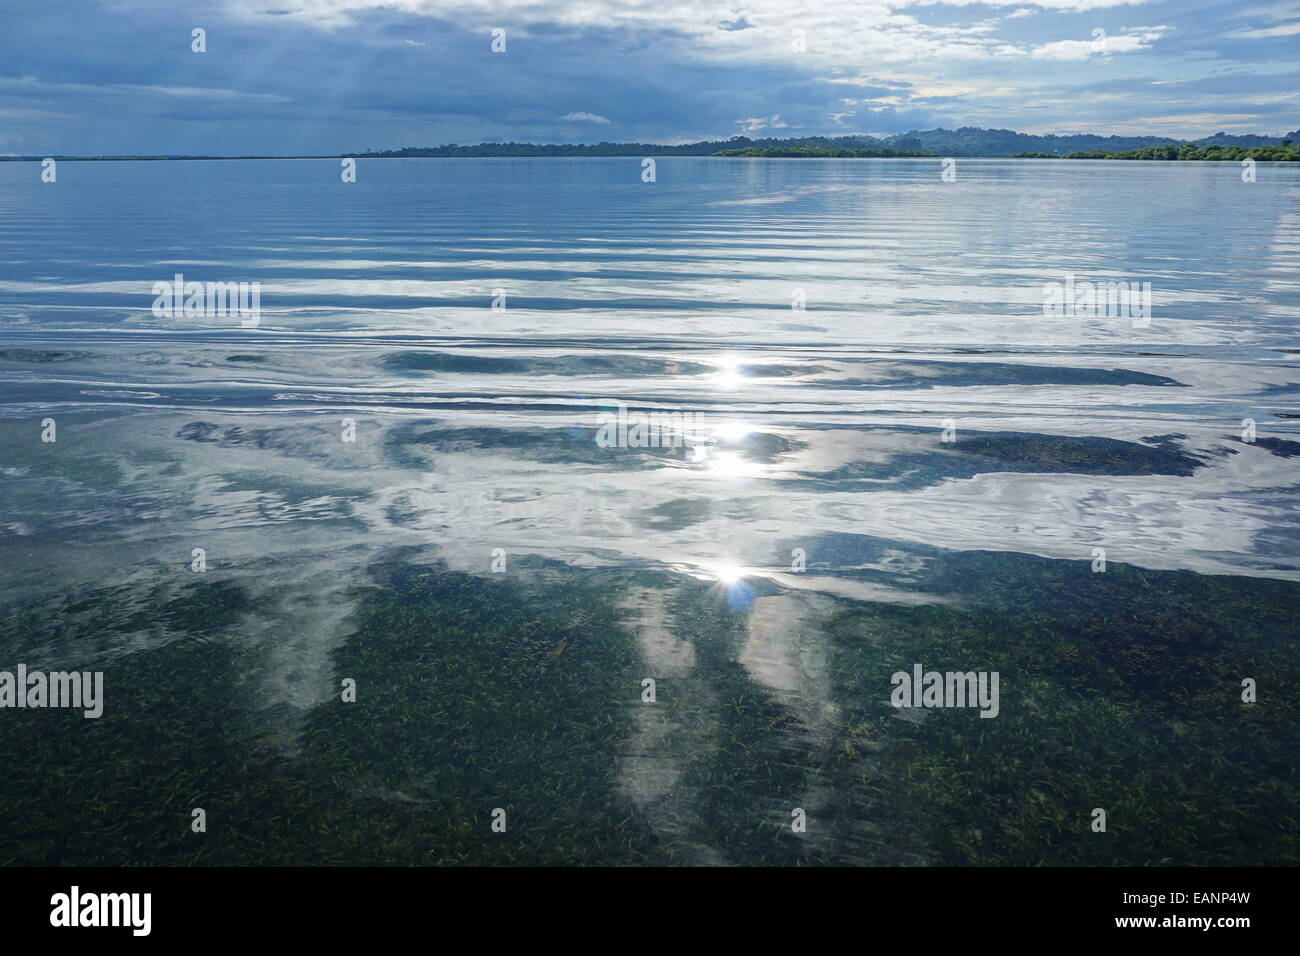 Sunlight reflected on calm water surface with cloudy sky and islands at the horizon, Dolphin bay, archipelago of Bocas del Toro, Stock Photo